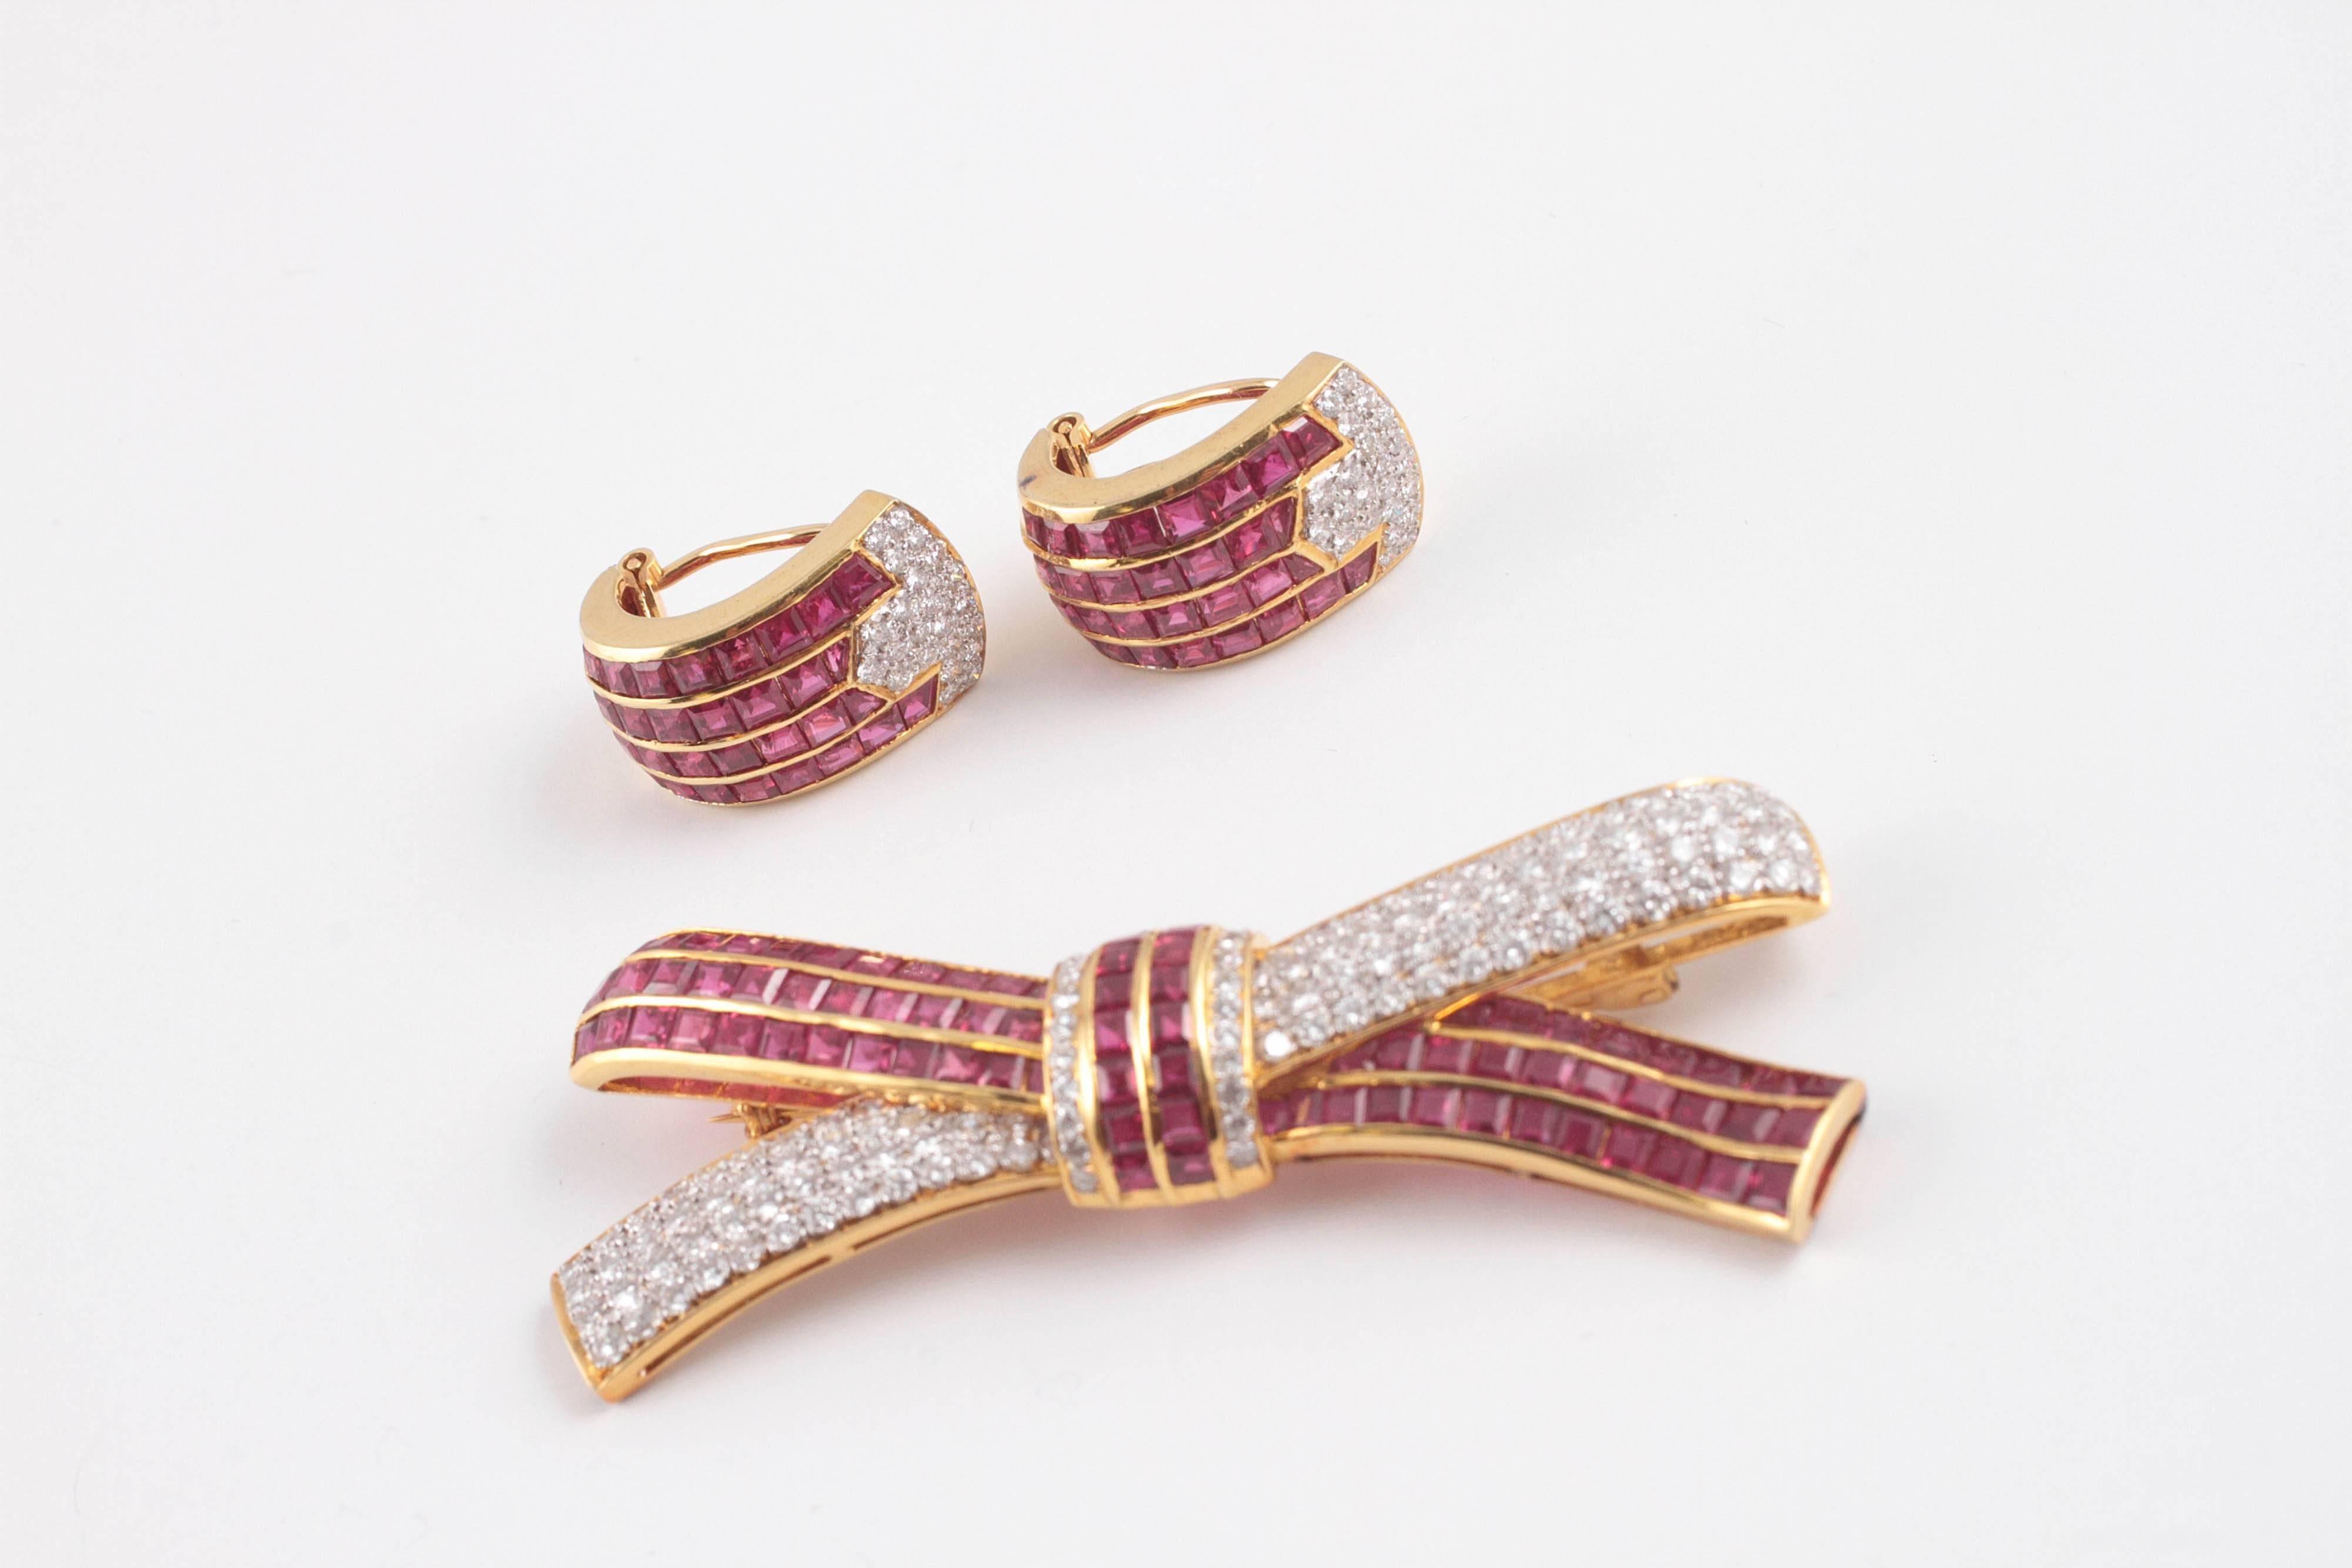 Stunning set for the right outfit!  Invisible and channel-set, rubies along with bead-set diamonds in 18 karat yellow gold.  The brooch is secured with a straight pin clasp and measures 70.00 mm in length.  The earrings are approximately 25.00 mm in